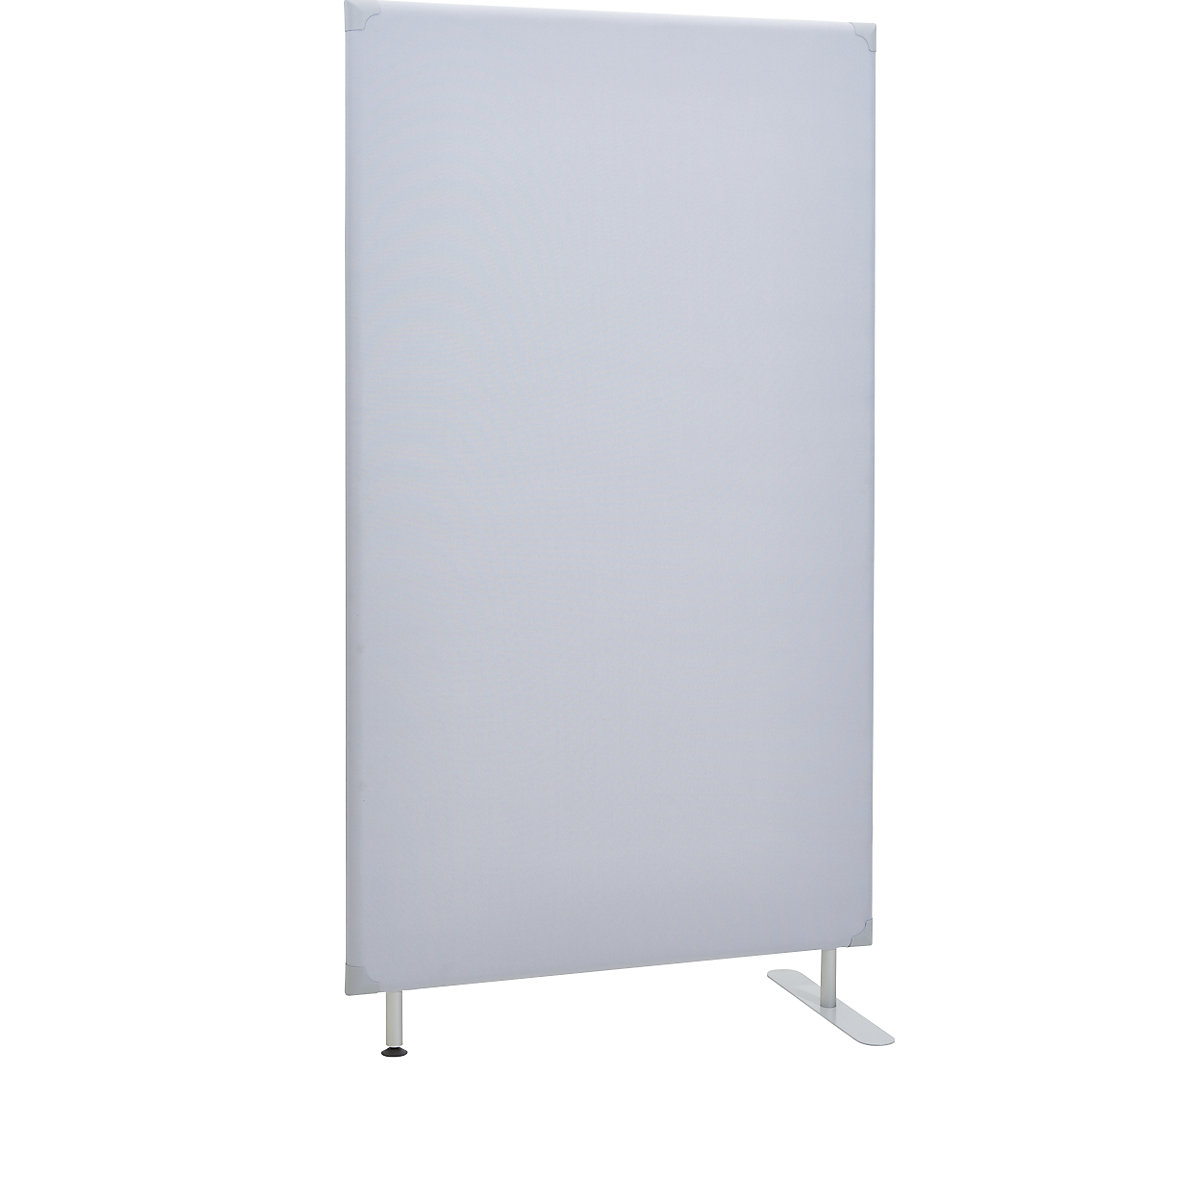 Soundproof partition – eurokraft pro, wall panel, height 1800 mm, width 1000 mm, grey-6